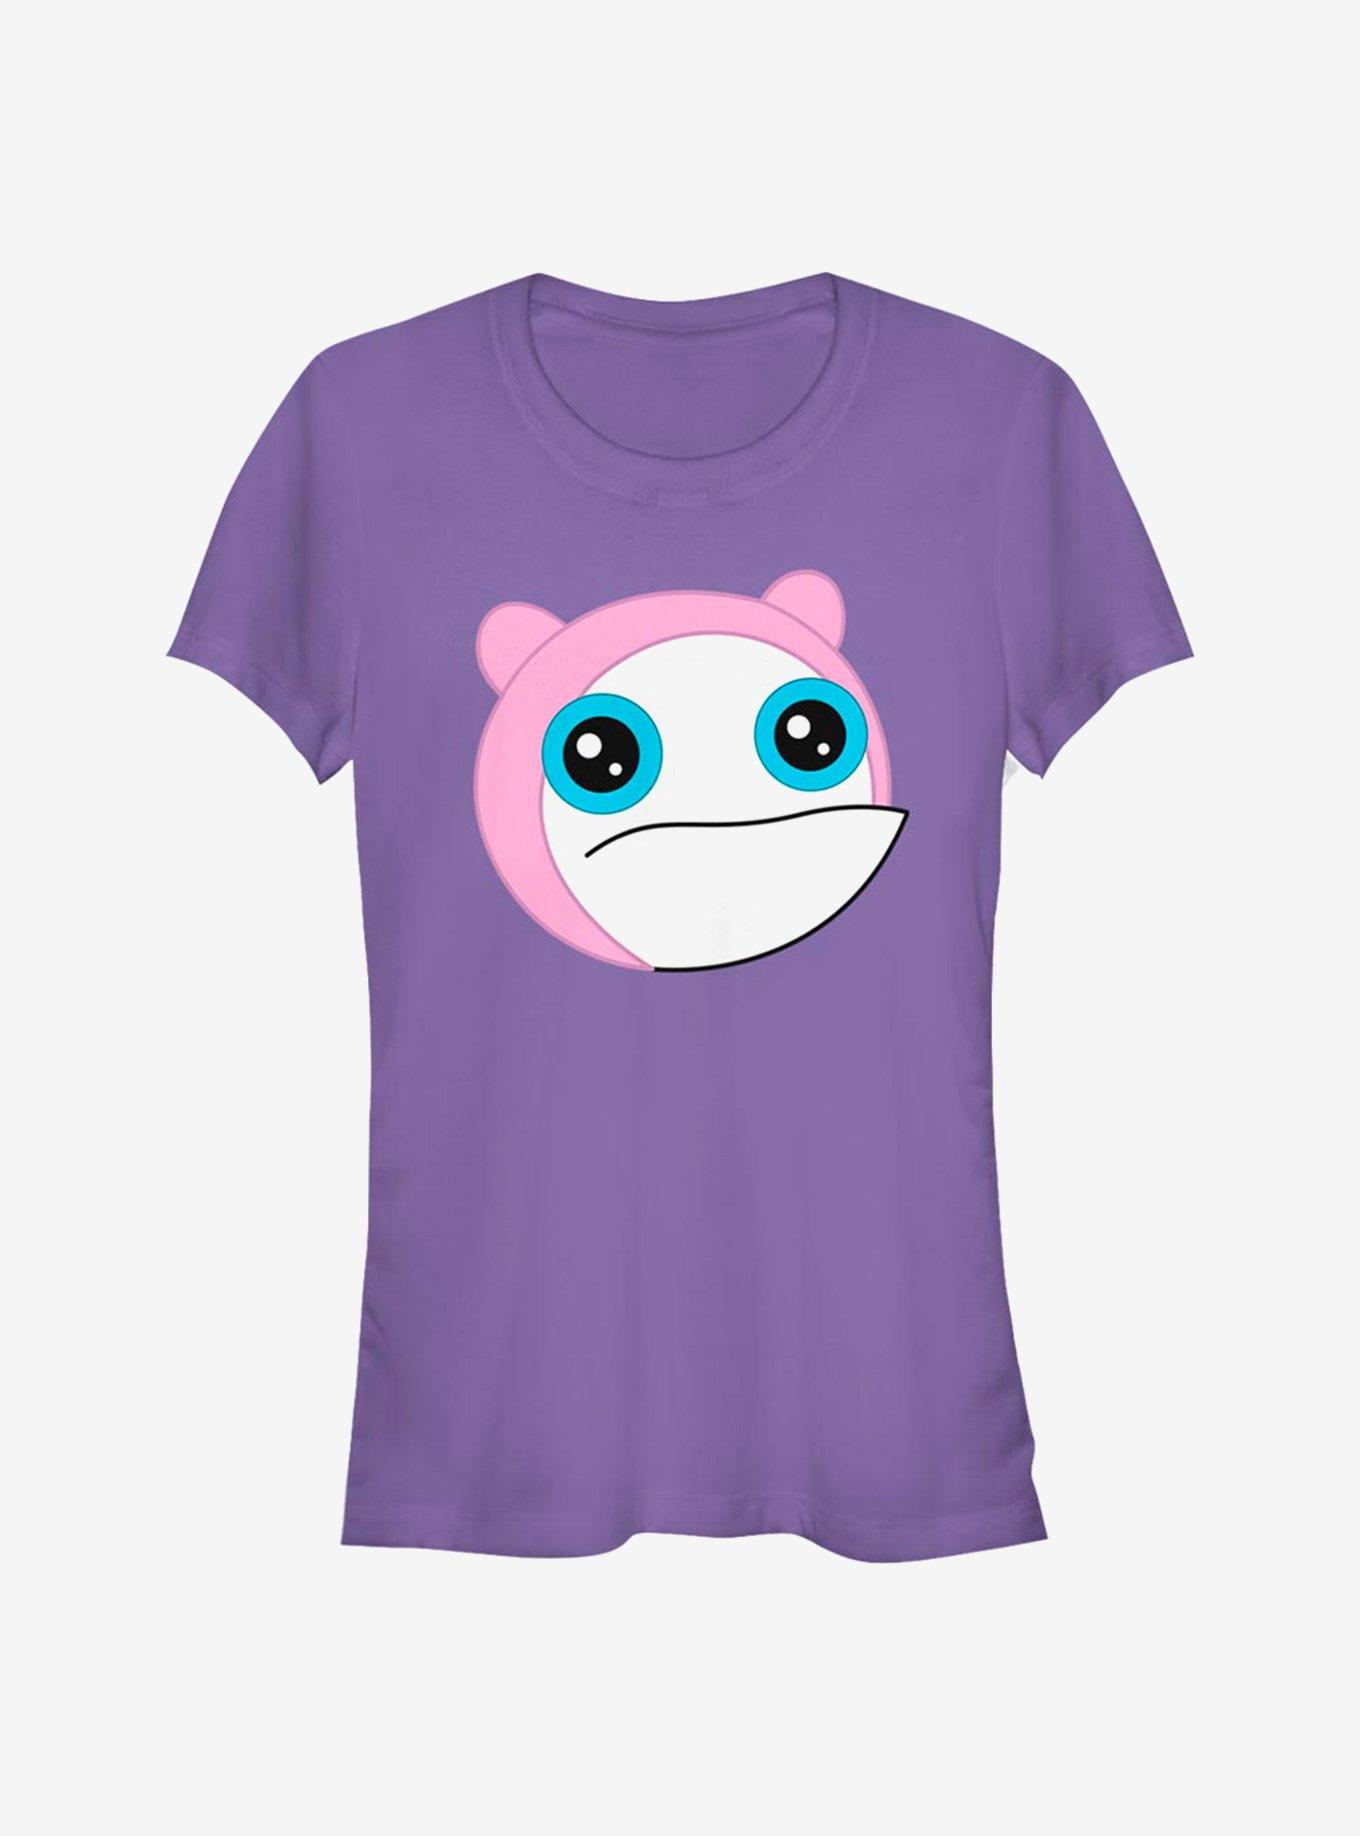 Disney Phineas And Ferb Large Meap Girls T-Shirt, PURPLE, hi-res